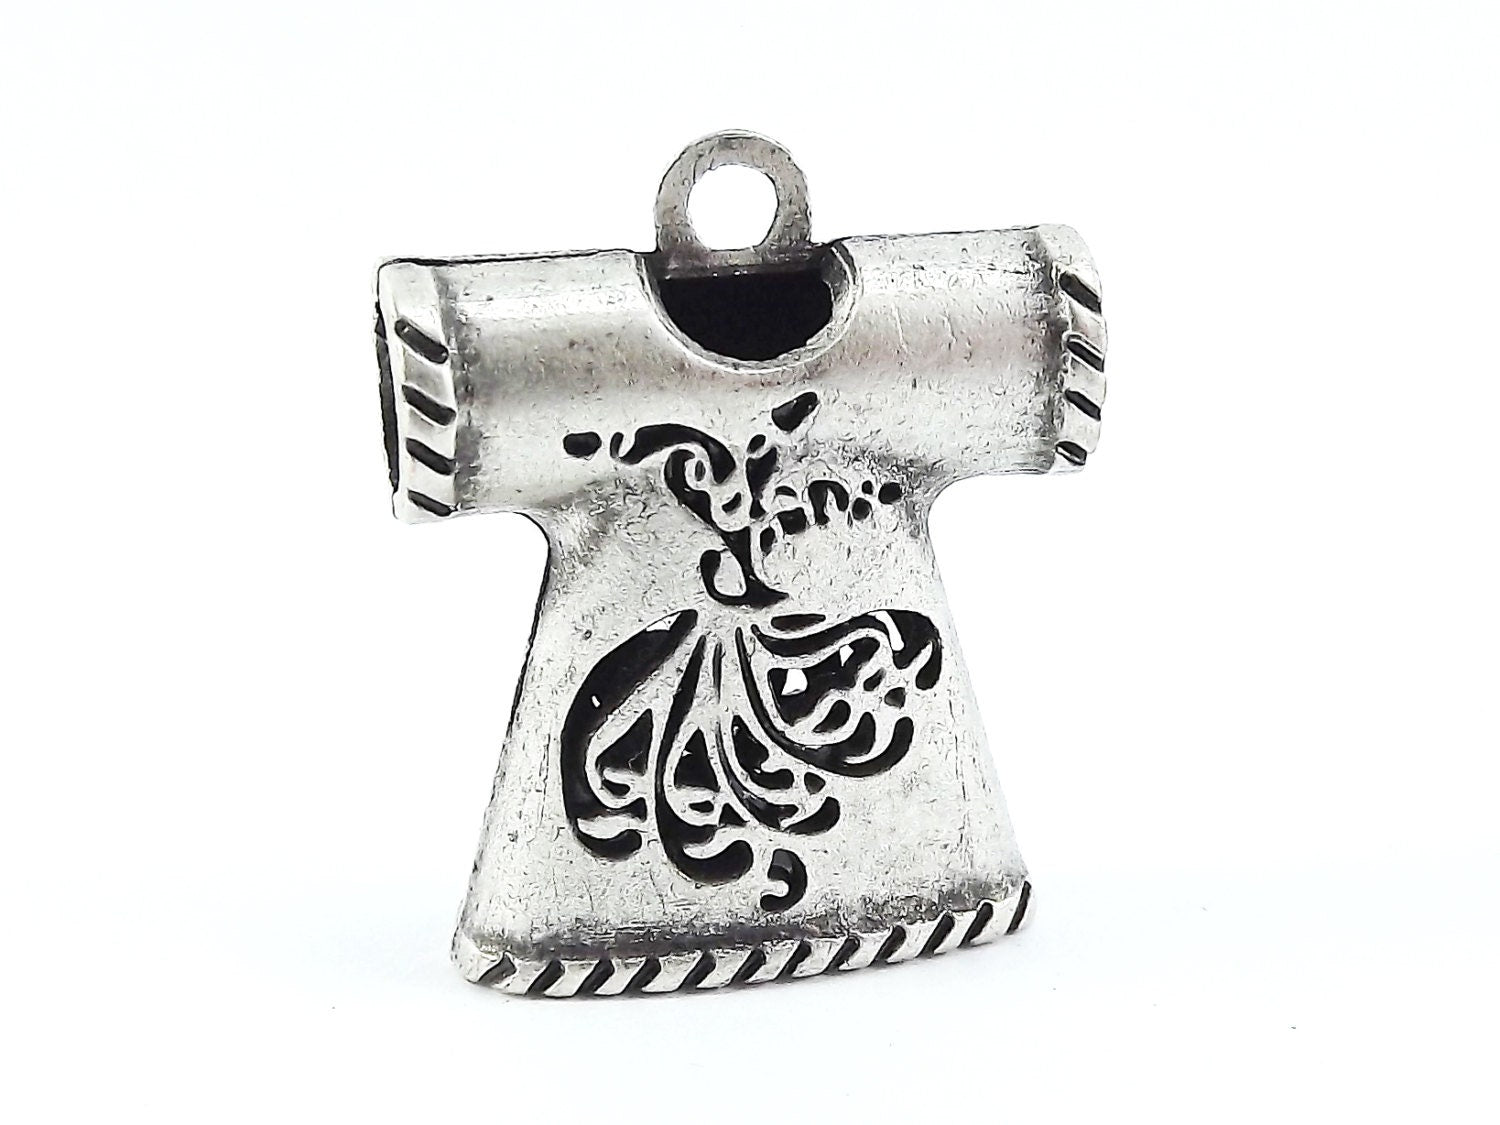 Turkish Caftan Pendant with Whirling Dervish Detail - Matte Antique Silver Plated - 1PC